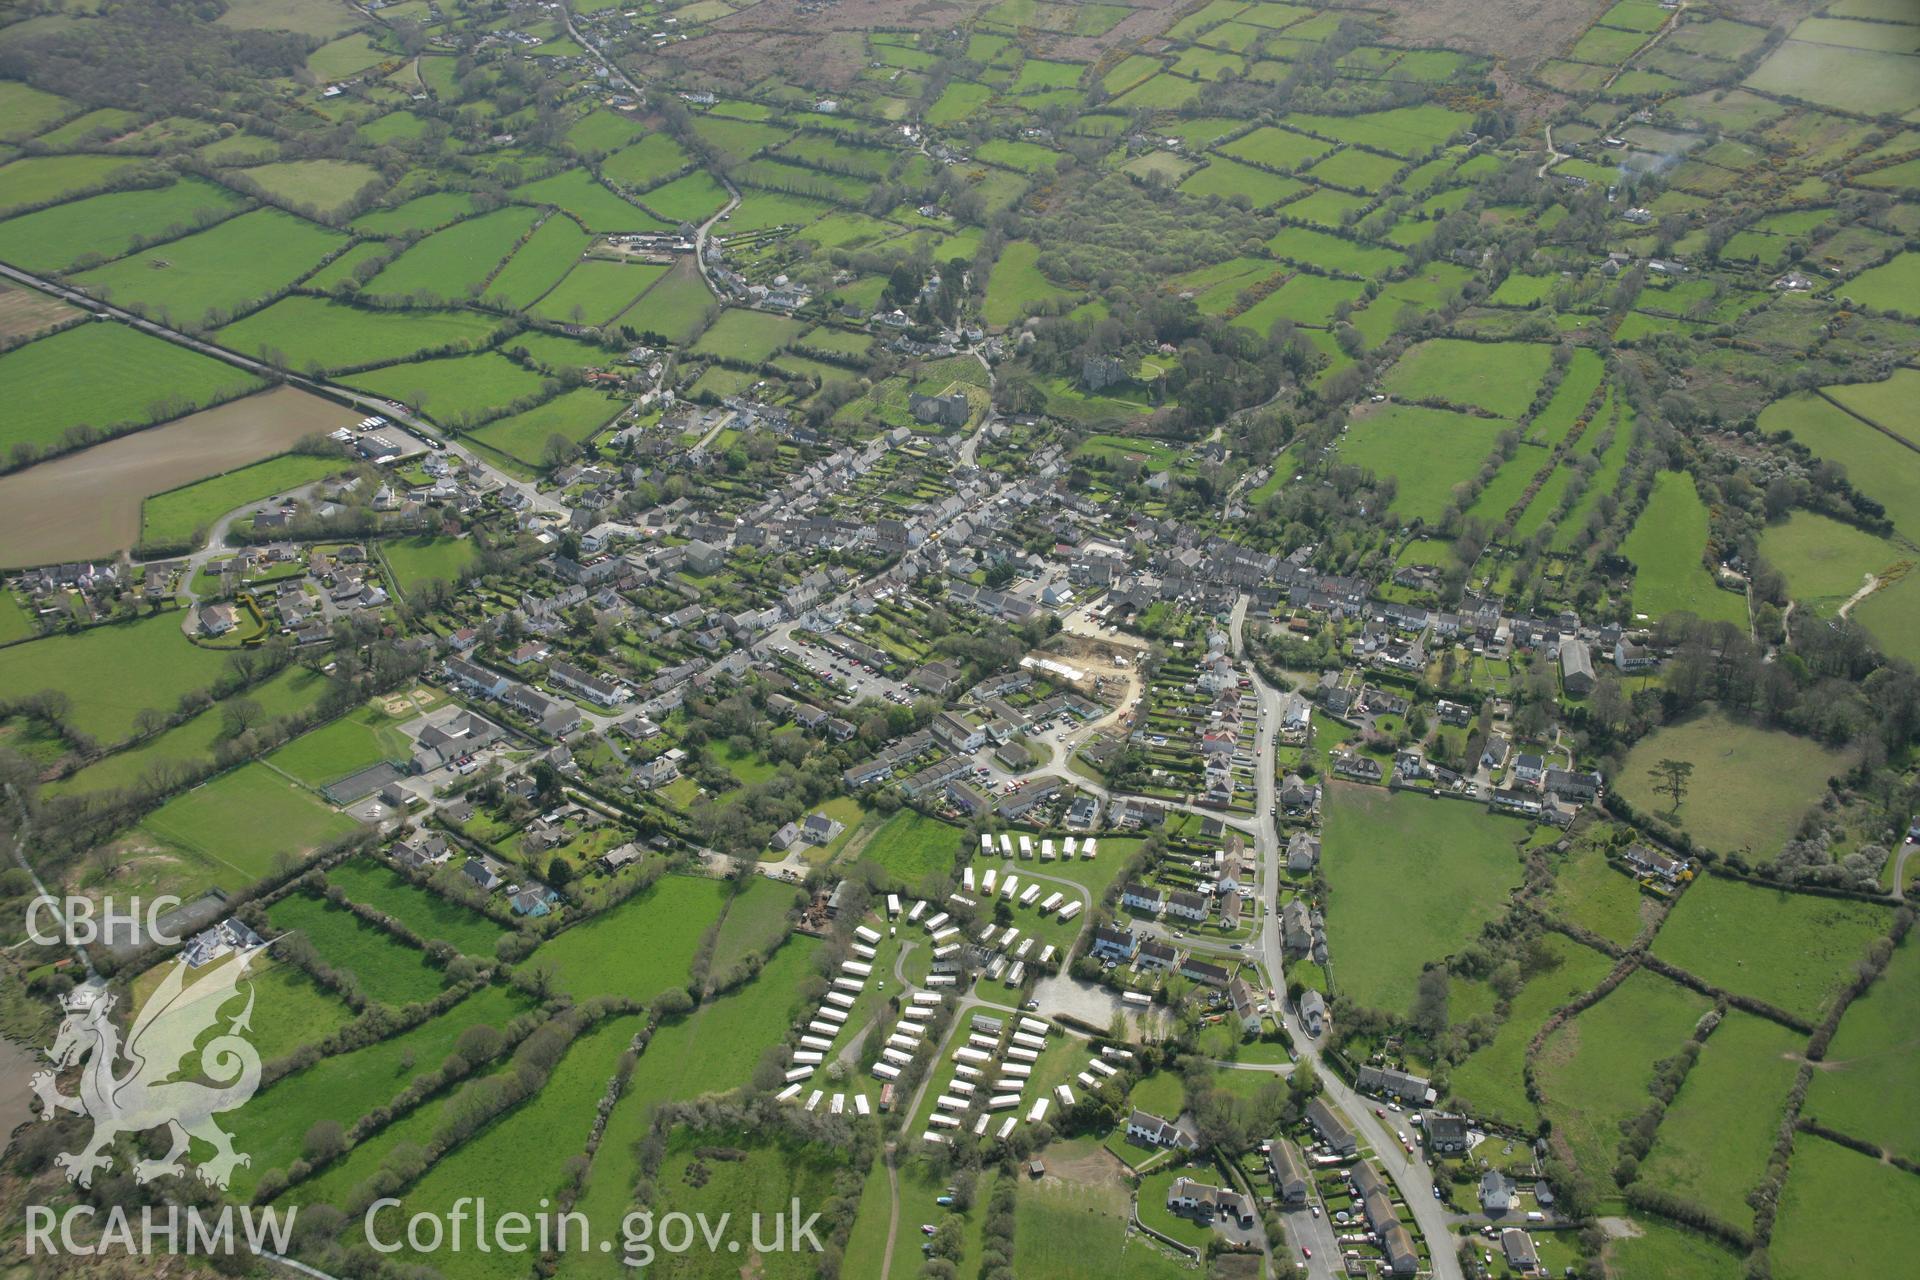 RCAHMW colour oblique aerial photograph showing view of town of Newport, Pembrokeshire. Taken on 17 April 2007 by Toby Driver